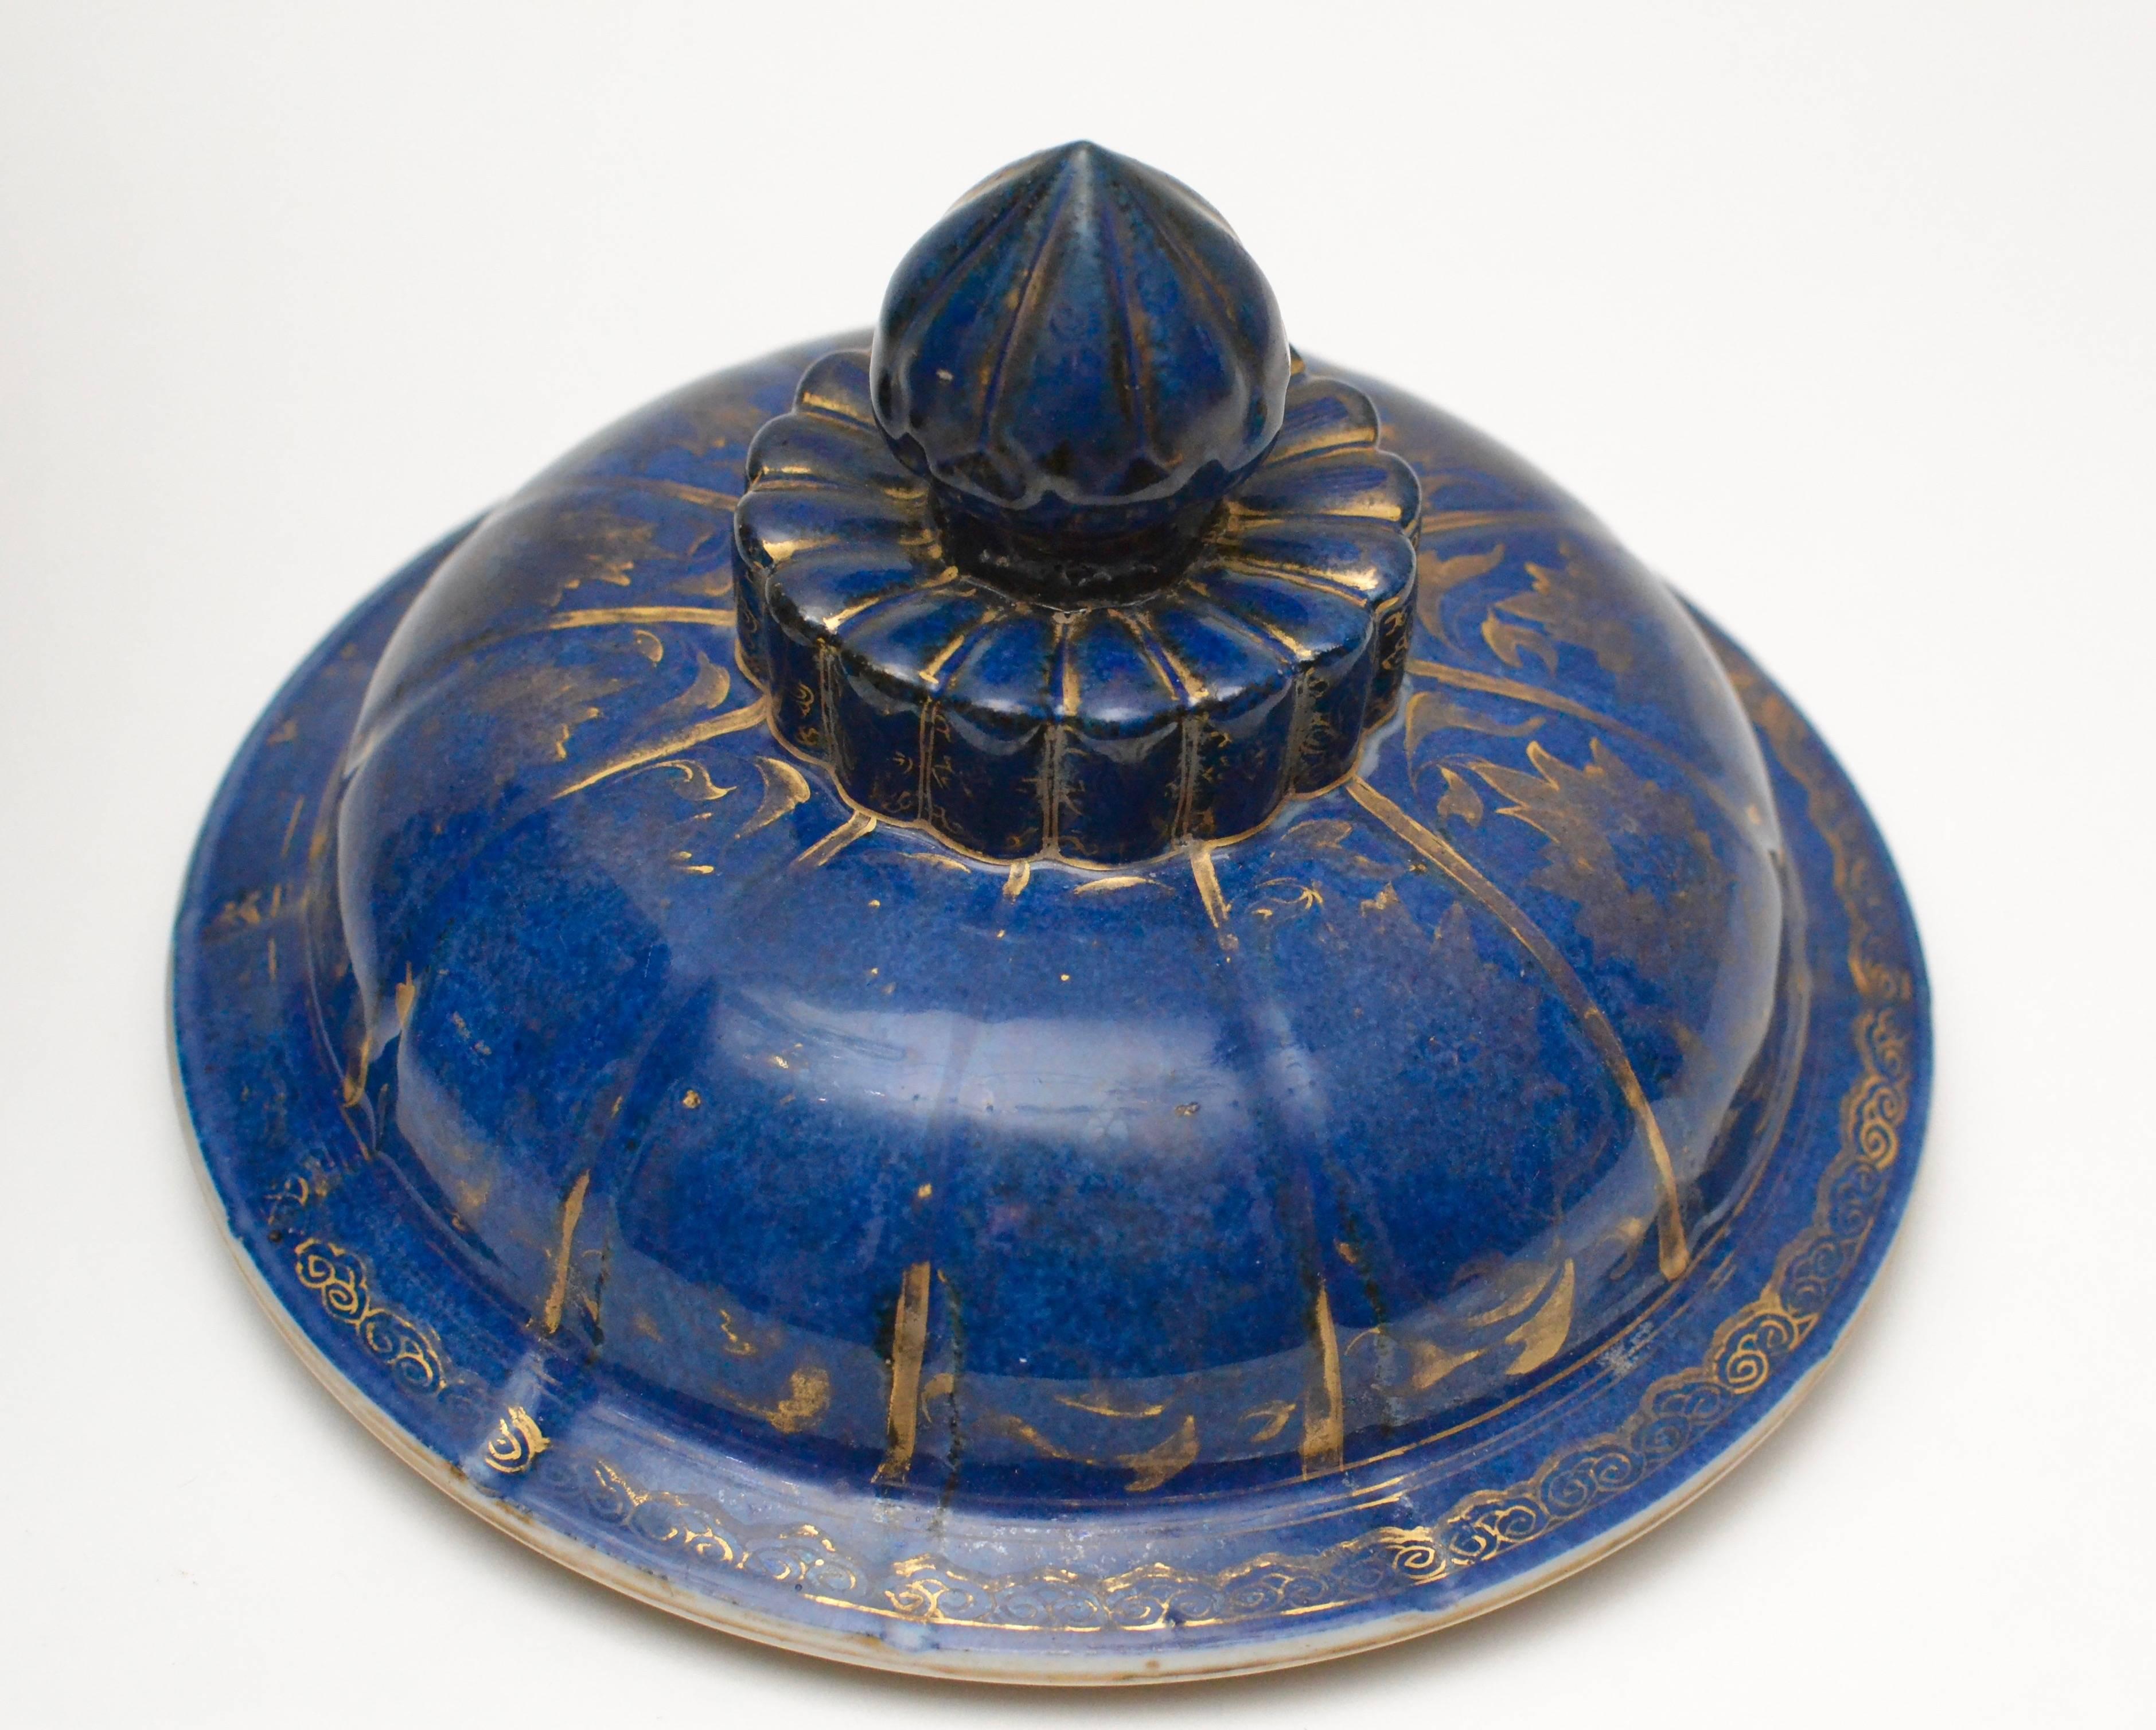 18th Century and Earlier Chinese Powderblue Urn with a Lid from the Kangxi Period (1661-1722)